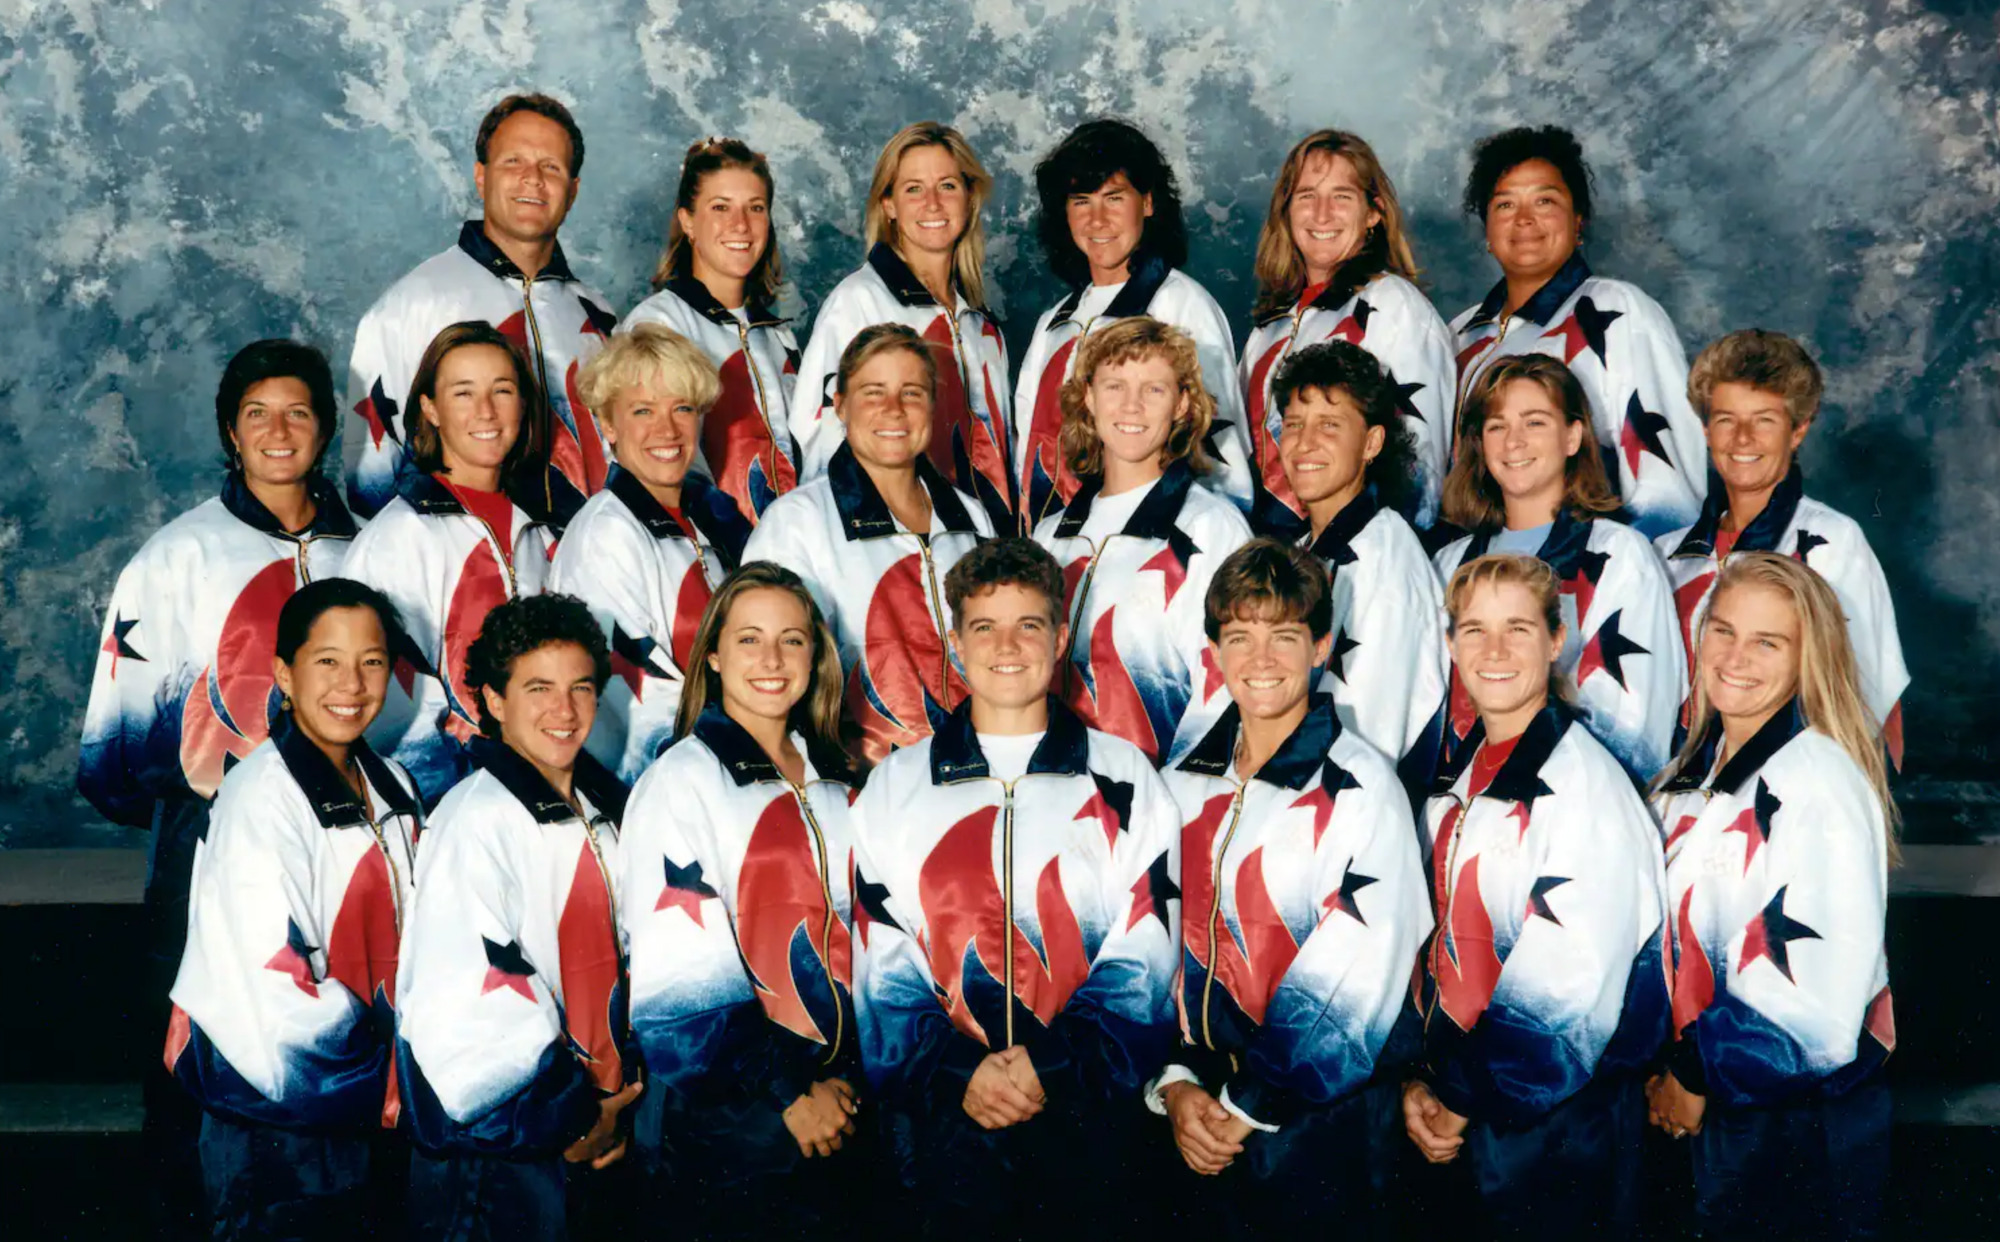 The 1996 U.S. Women’s Olympic Field Hockey Team showing Andrea Wieland and her teammates.